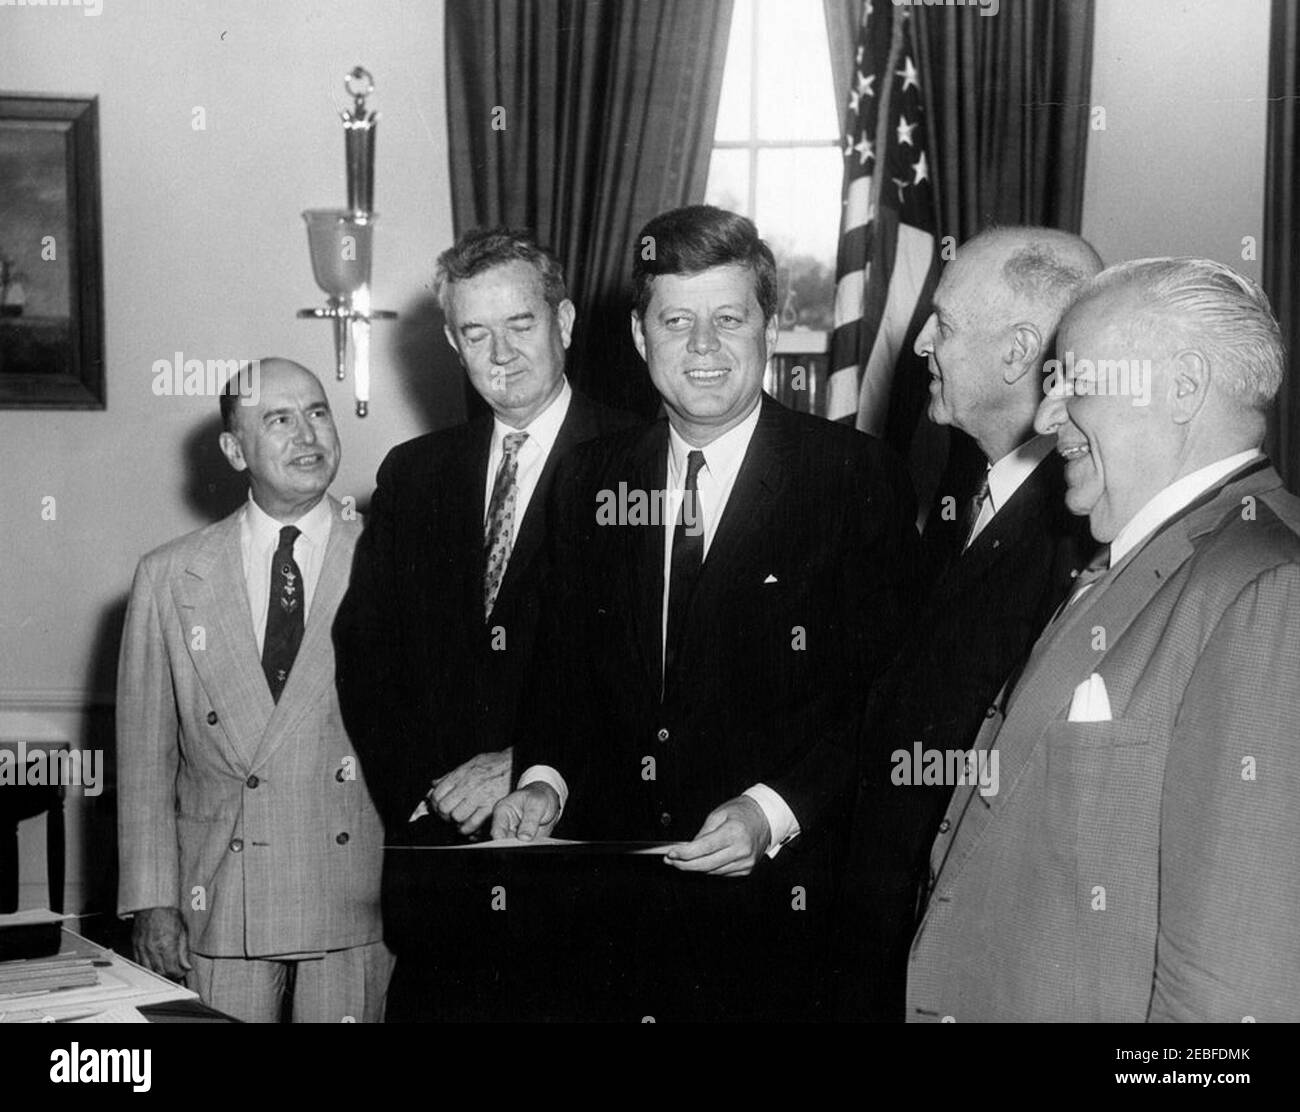 https://c8.alamy.com/comp/2EBFDMK/bill-signing-of-s-900-u2013-medals-commemorating-of-the-250th-anniversary-founding-of-mobile-alabama-352pm-president-john-f-kennedy-poses-for-photographs-after-signing-the-bill-s-900-in-the-oval-office-white-house-washington-dc-the-bill-provides-for-the-striking-of-medals-in-commemoration-of-the-250th-anniversary-of-the-founding-of-mobile-alabama-l-r-alphonse-lucas-assistant-to-representative-frank-boykin-of-alabama-senator-john-sparkman-of-alabama-president-kennedy-senator-lister-hill-of-alabama-representative-boykin-2EBFDMK.jpg